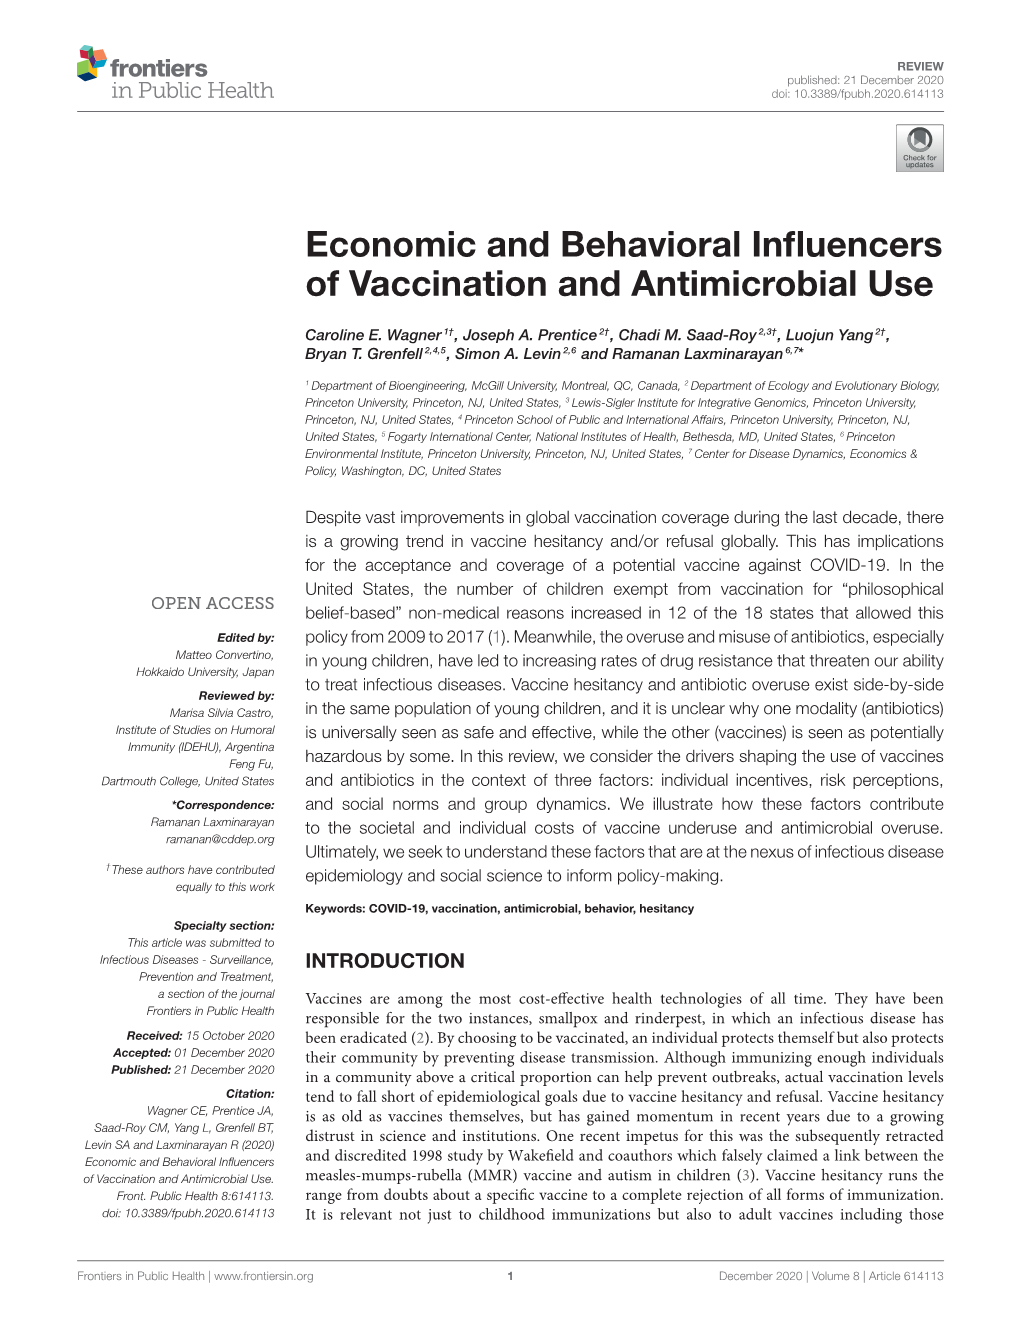 Economic and Behavioral Influencers of Vaccination And